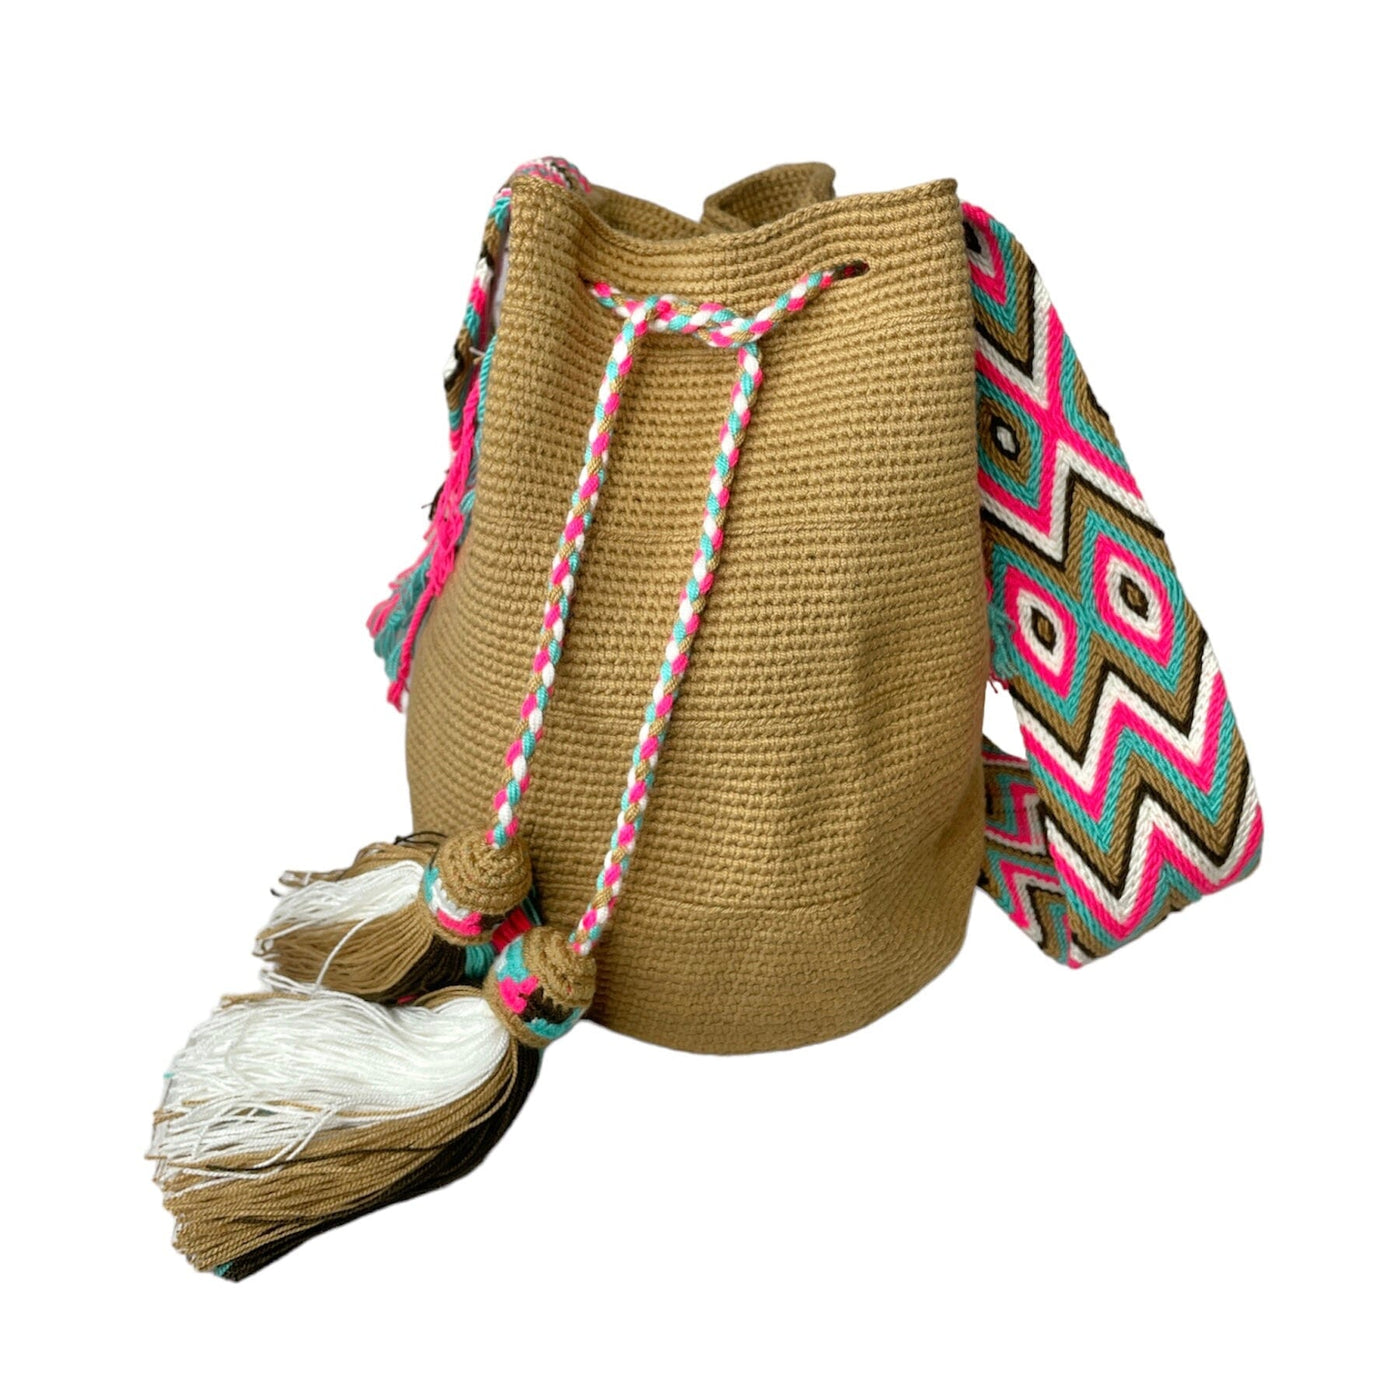 Cotton Candy Skies | Shop Colorful Beach Bags | Bohemian Crossbody Bag for Summer | Colorful 4U